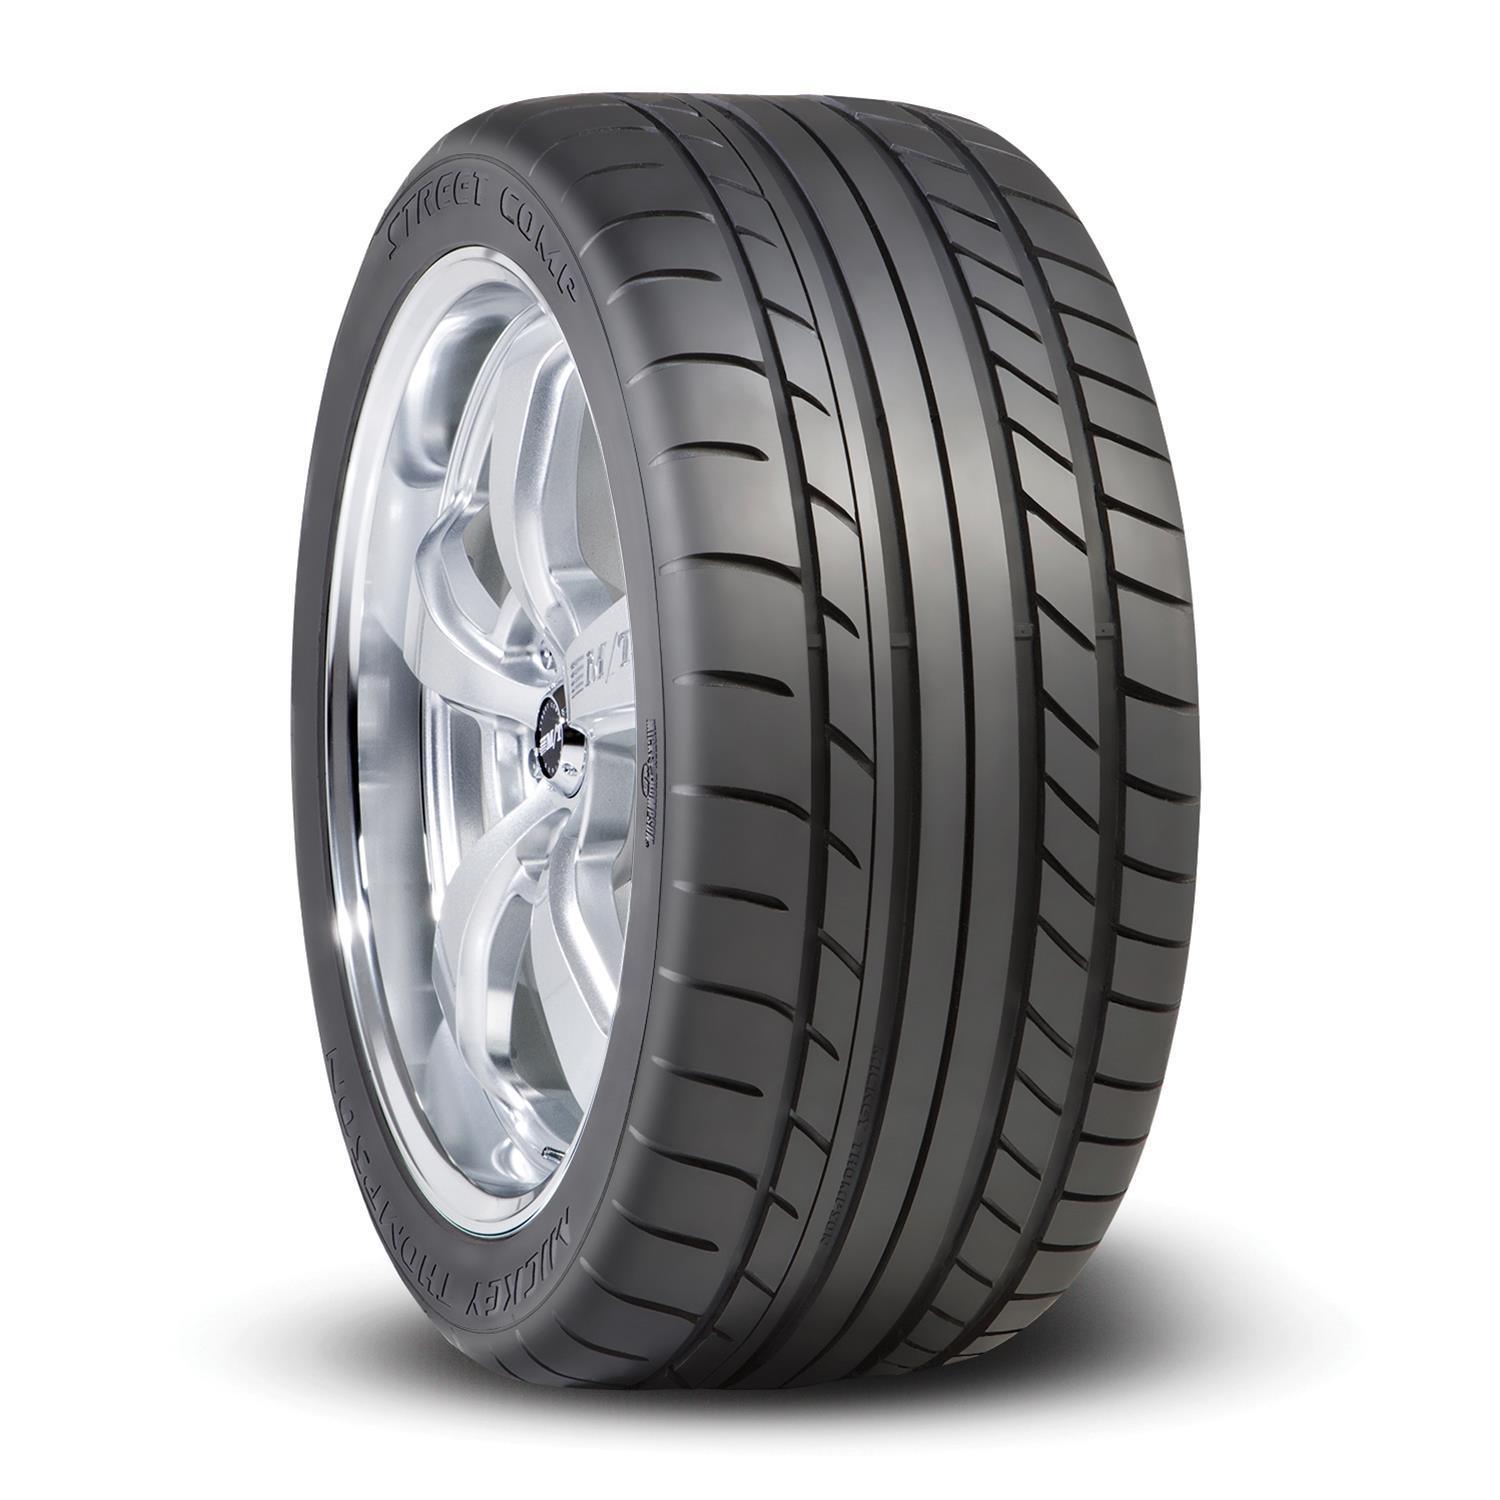 285/35R19 UHP Street Comp Tire - Burlile Performance Products